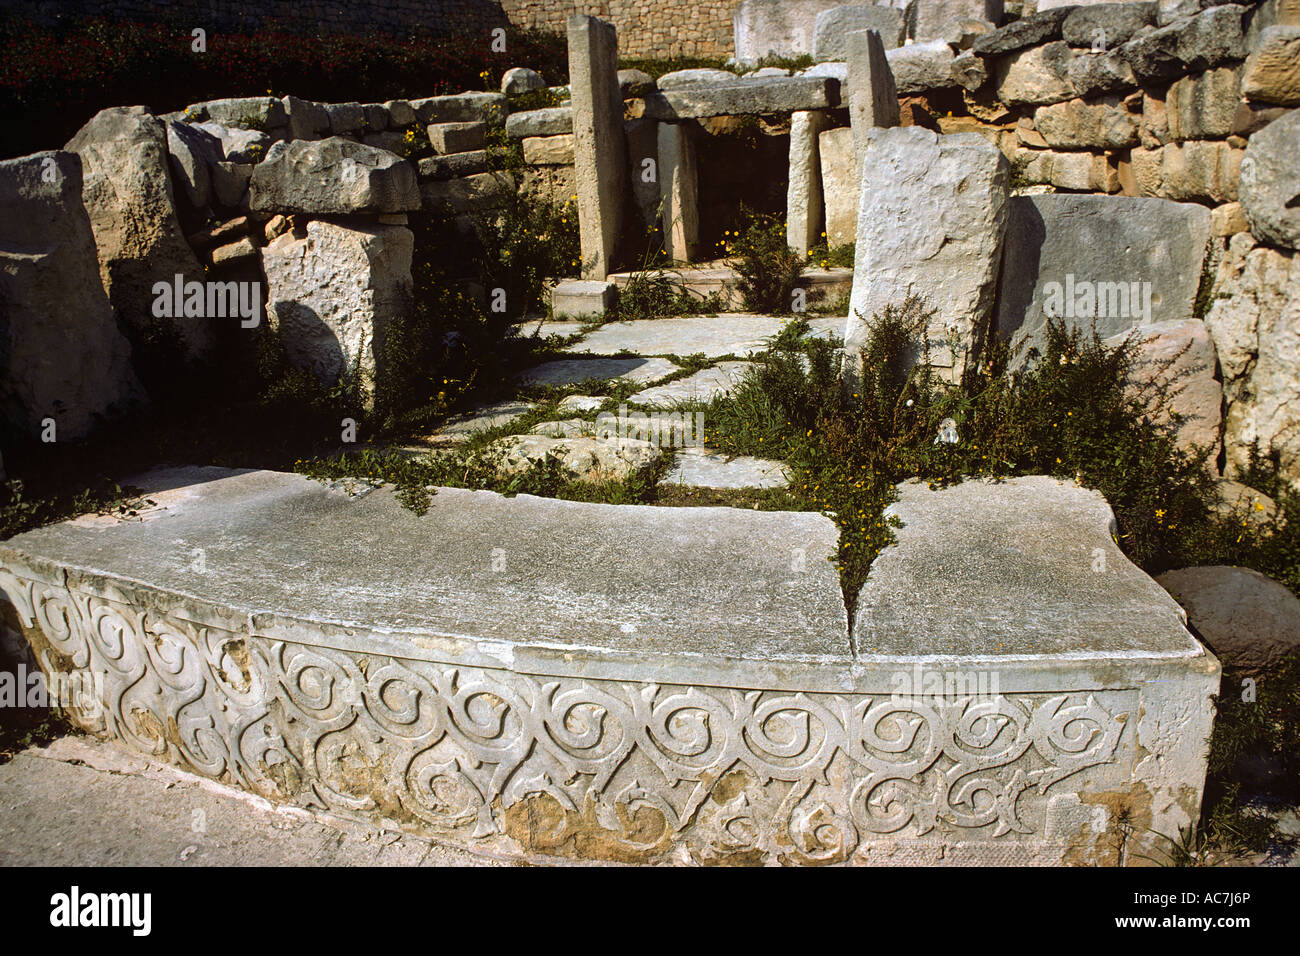 carved and decorated stone slab in front of altar within the Tarxien Temple on the Mediterranean Island of Malta Stock Photo